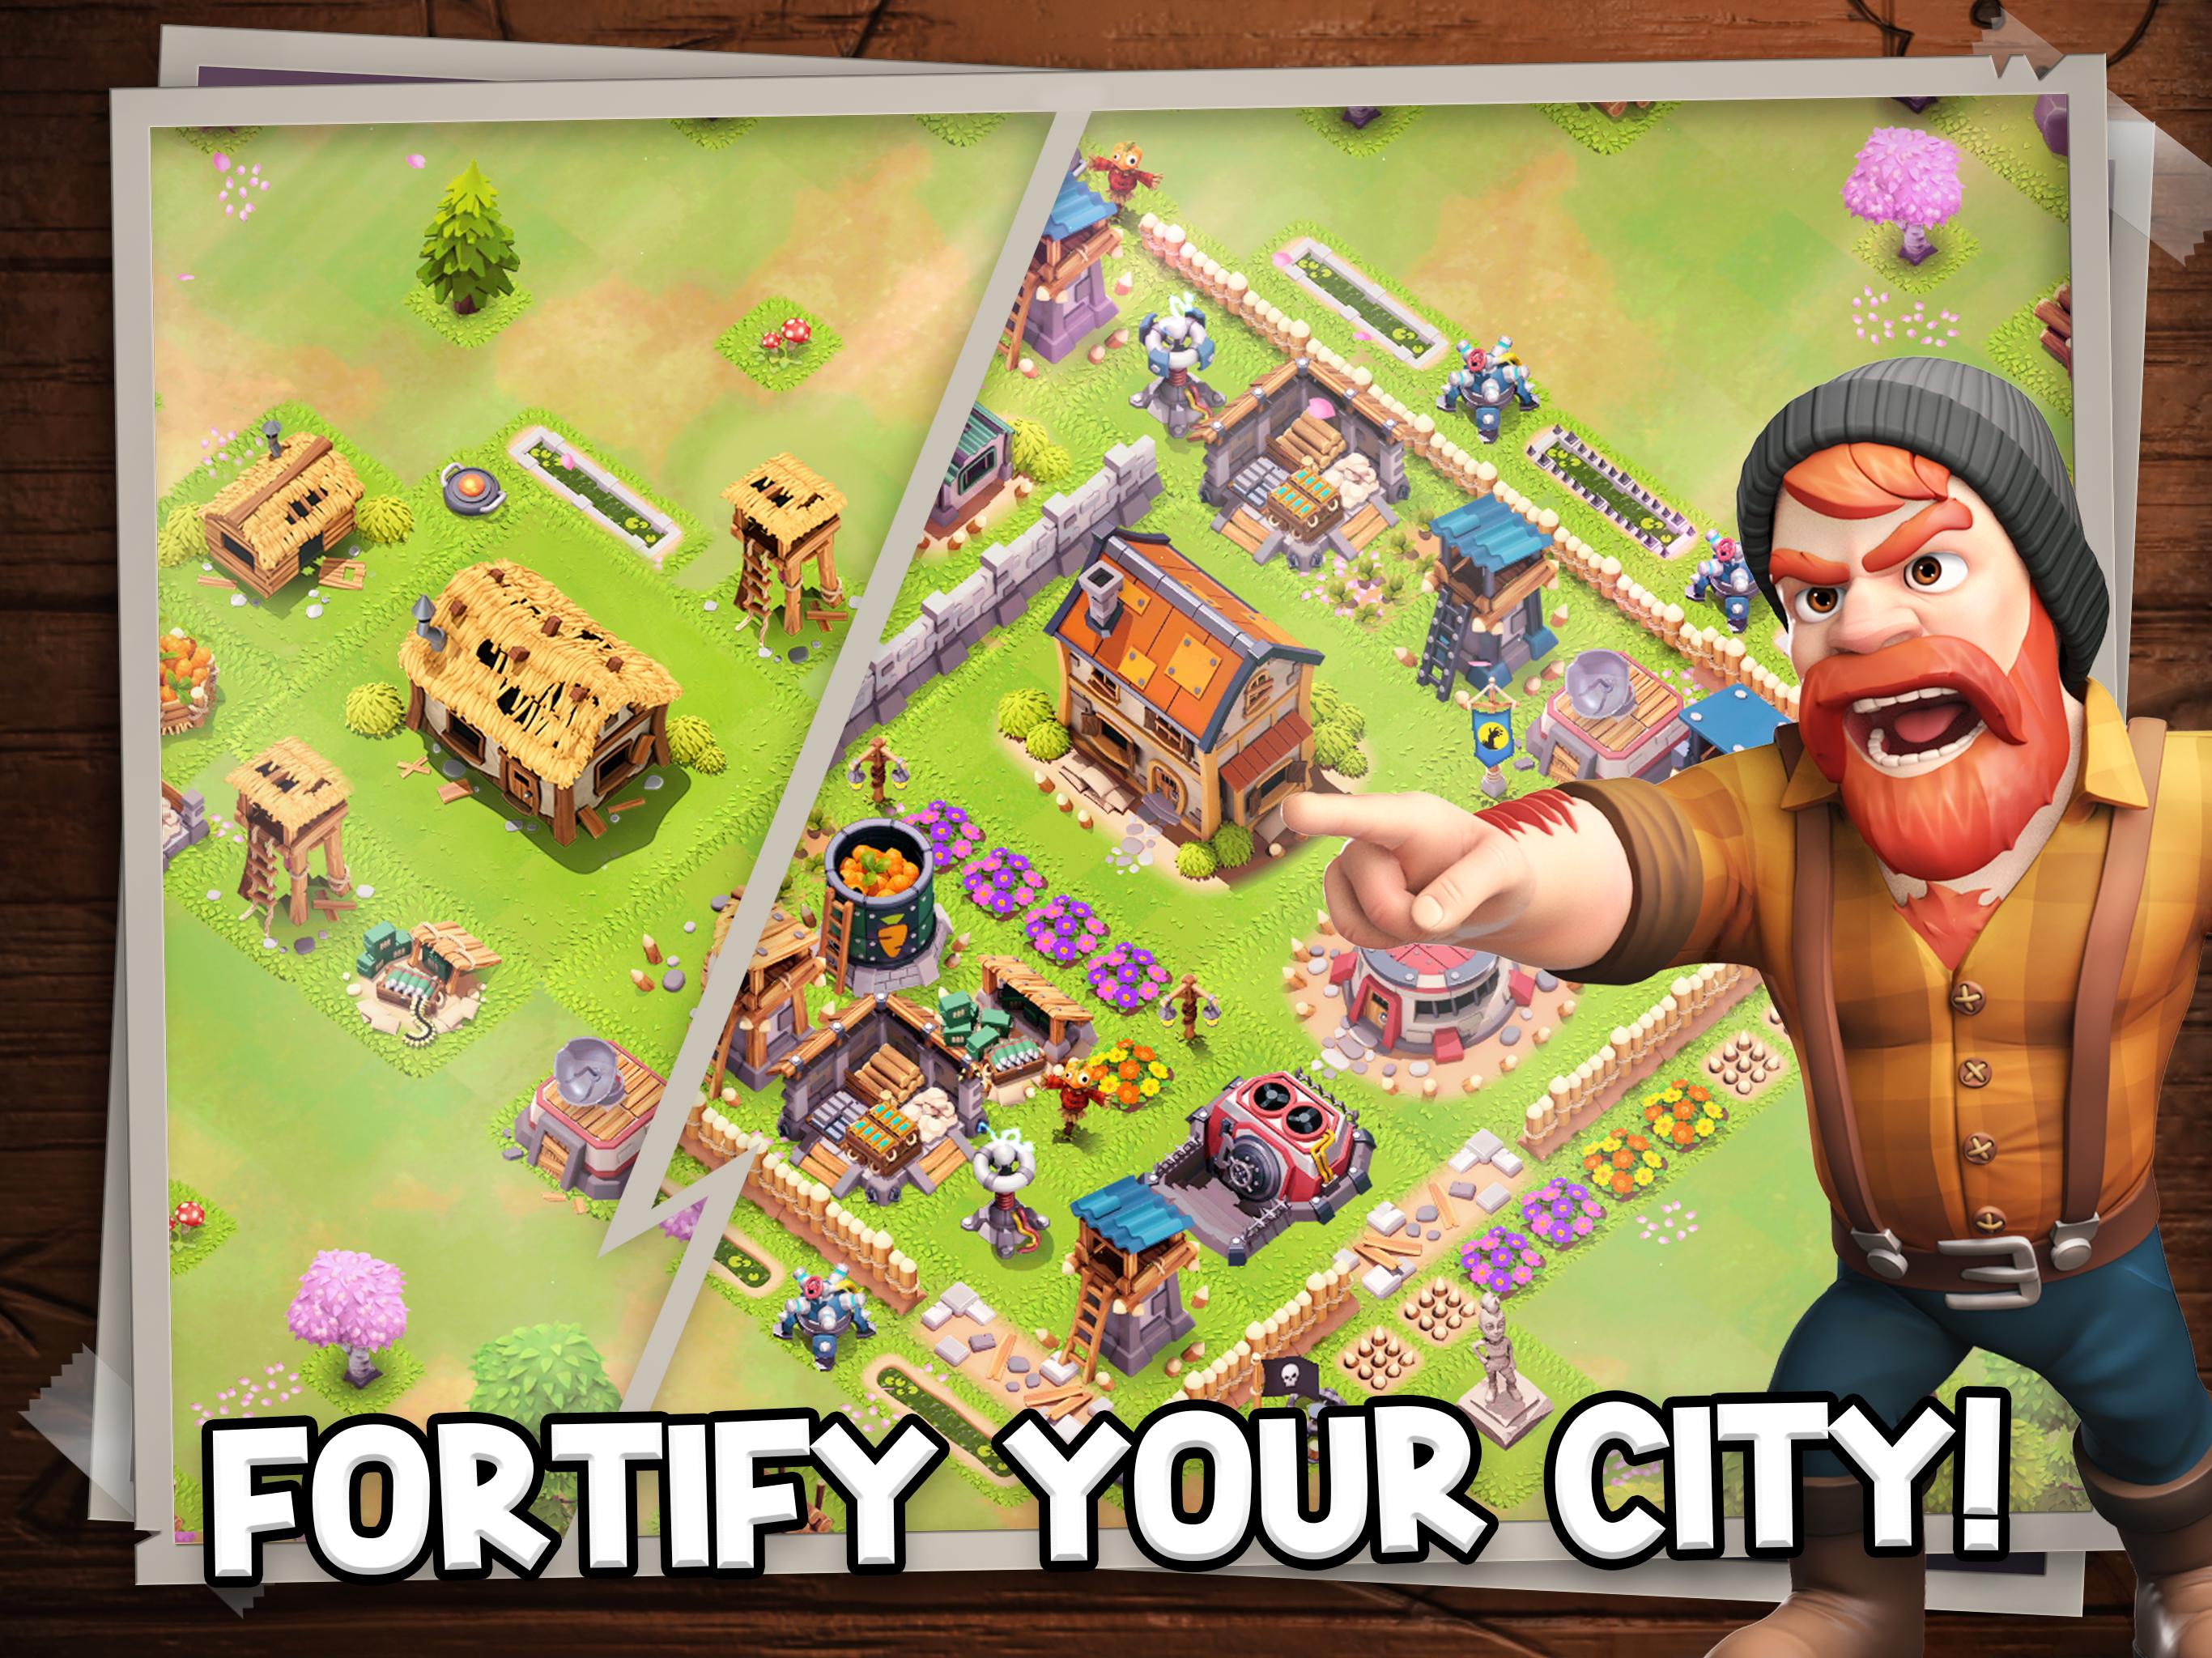 Survival City for Android - APK Download